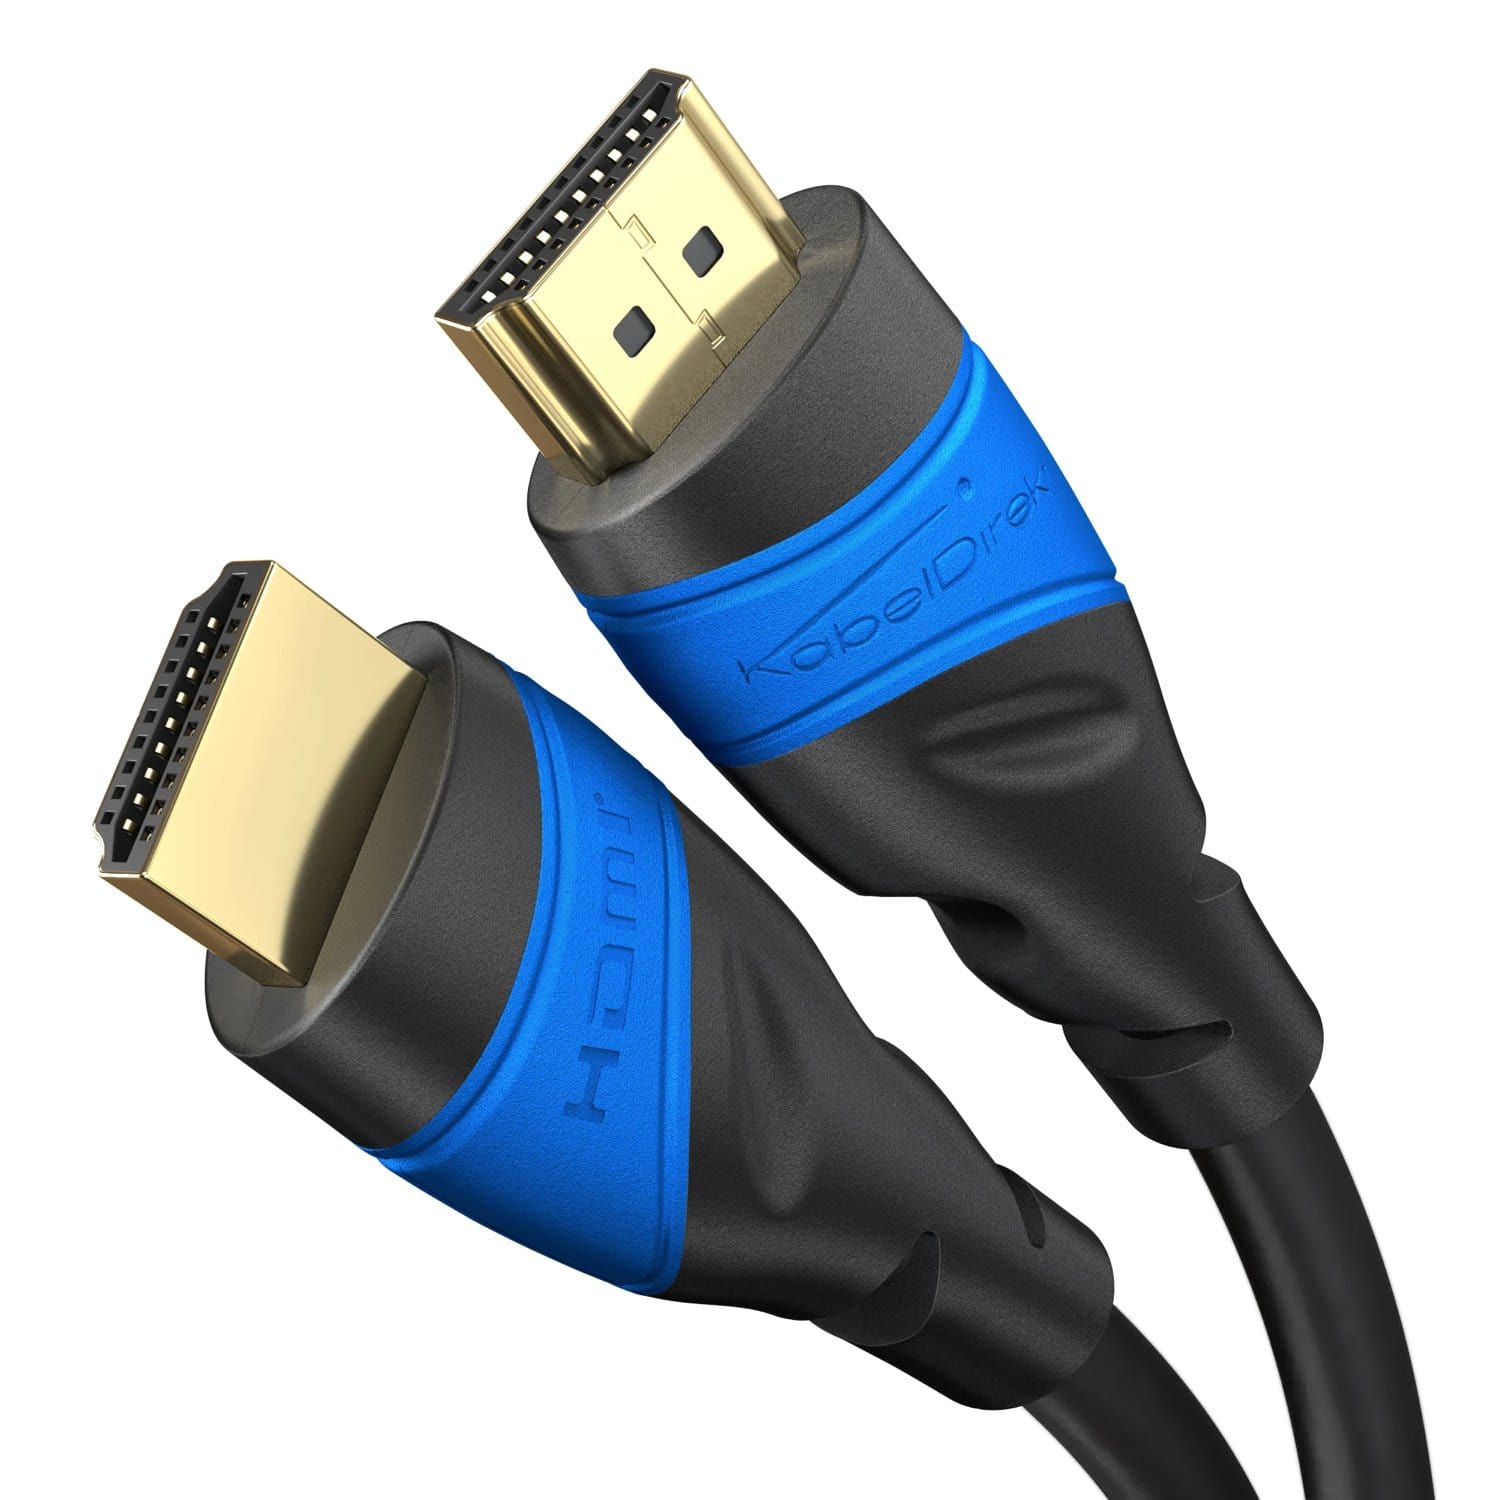 High-speed HDMI 2.0 cable from KabelDirekt – With Ethernet, 4K/8K